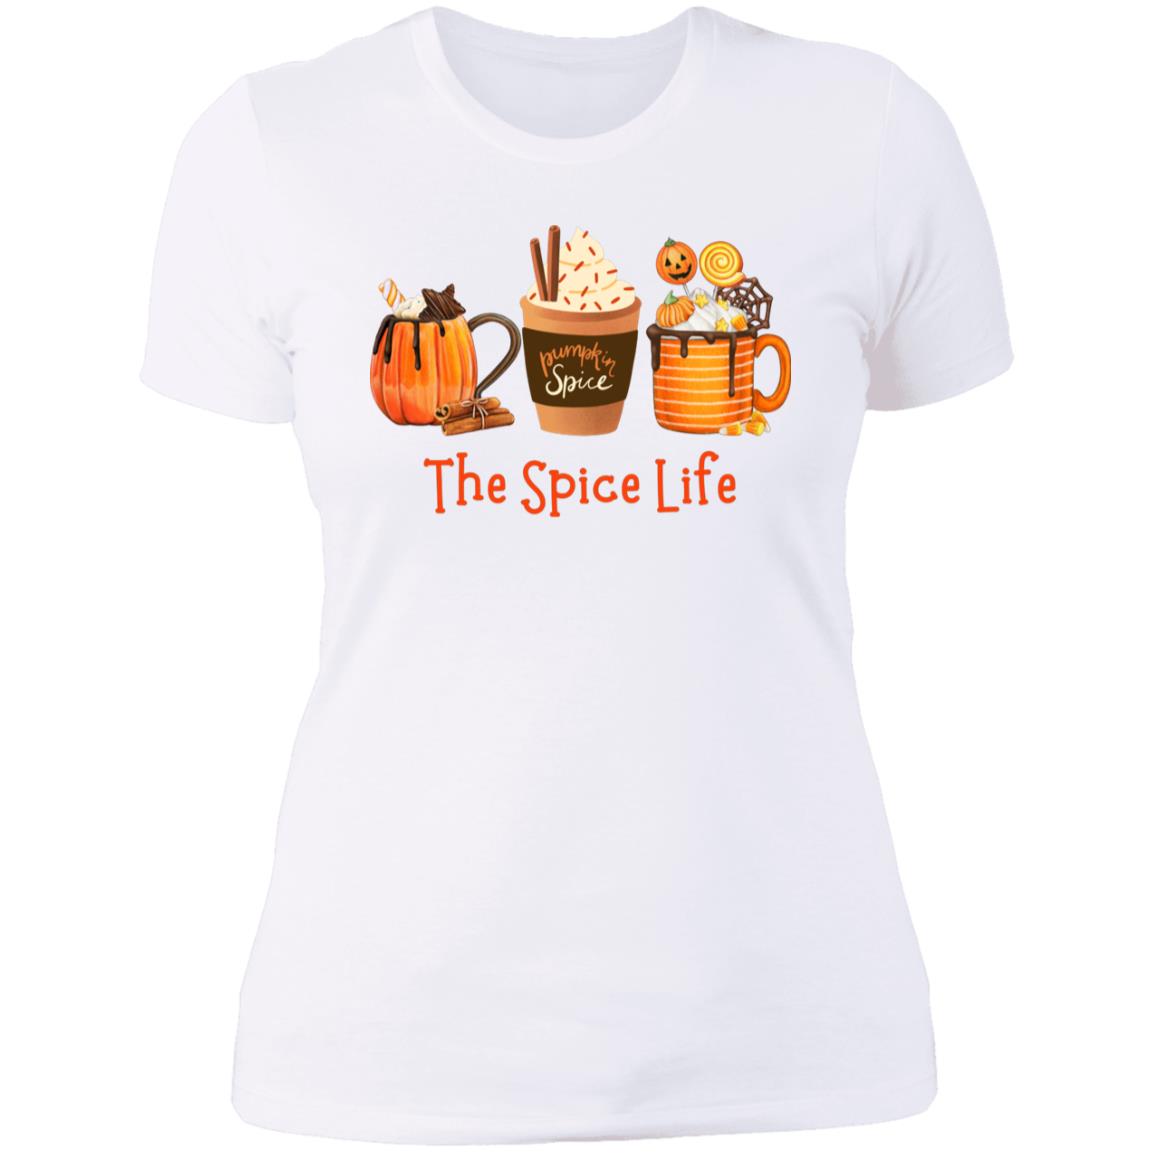 The Spice Life Shirt